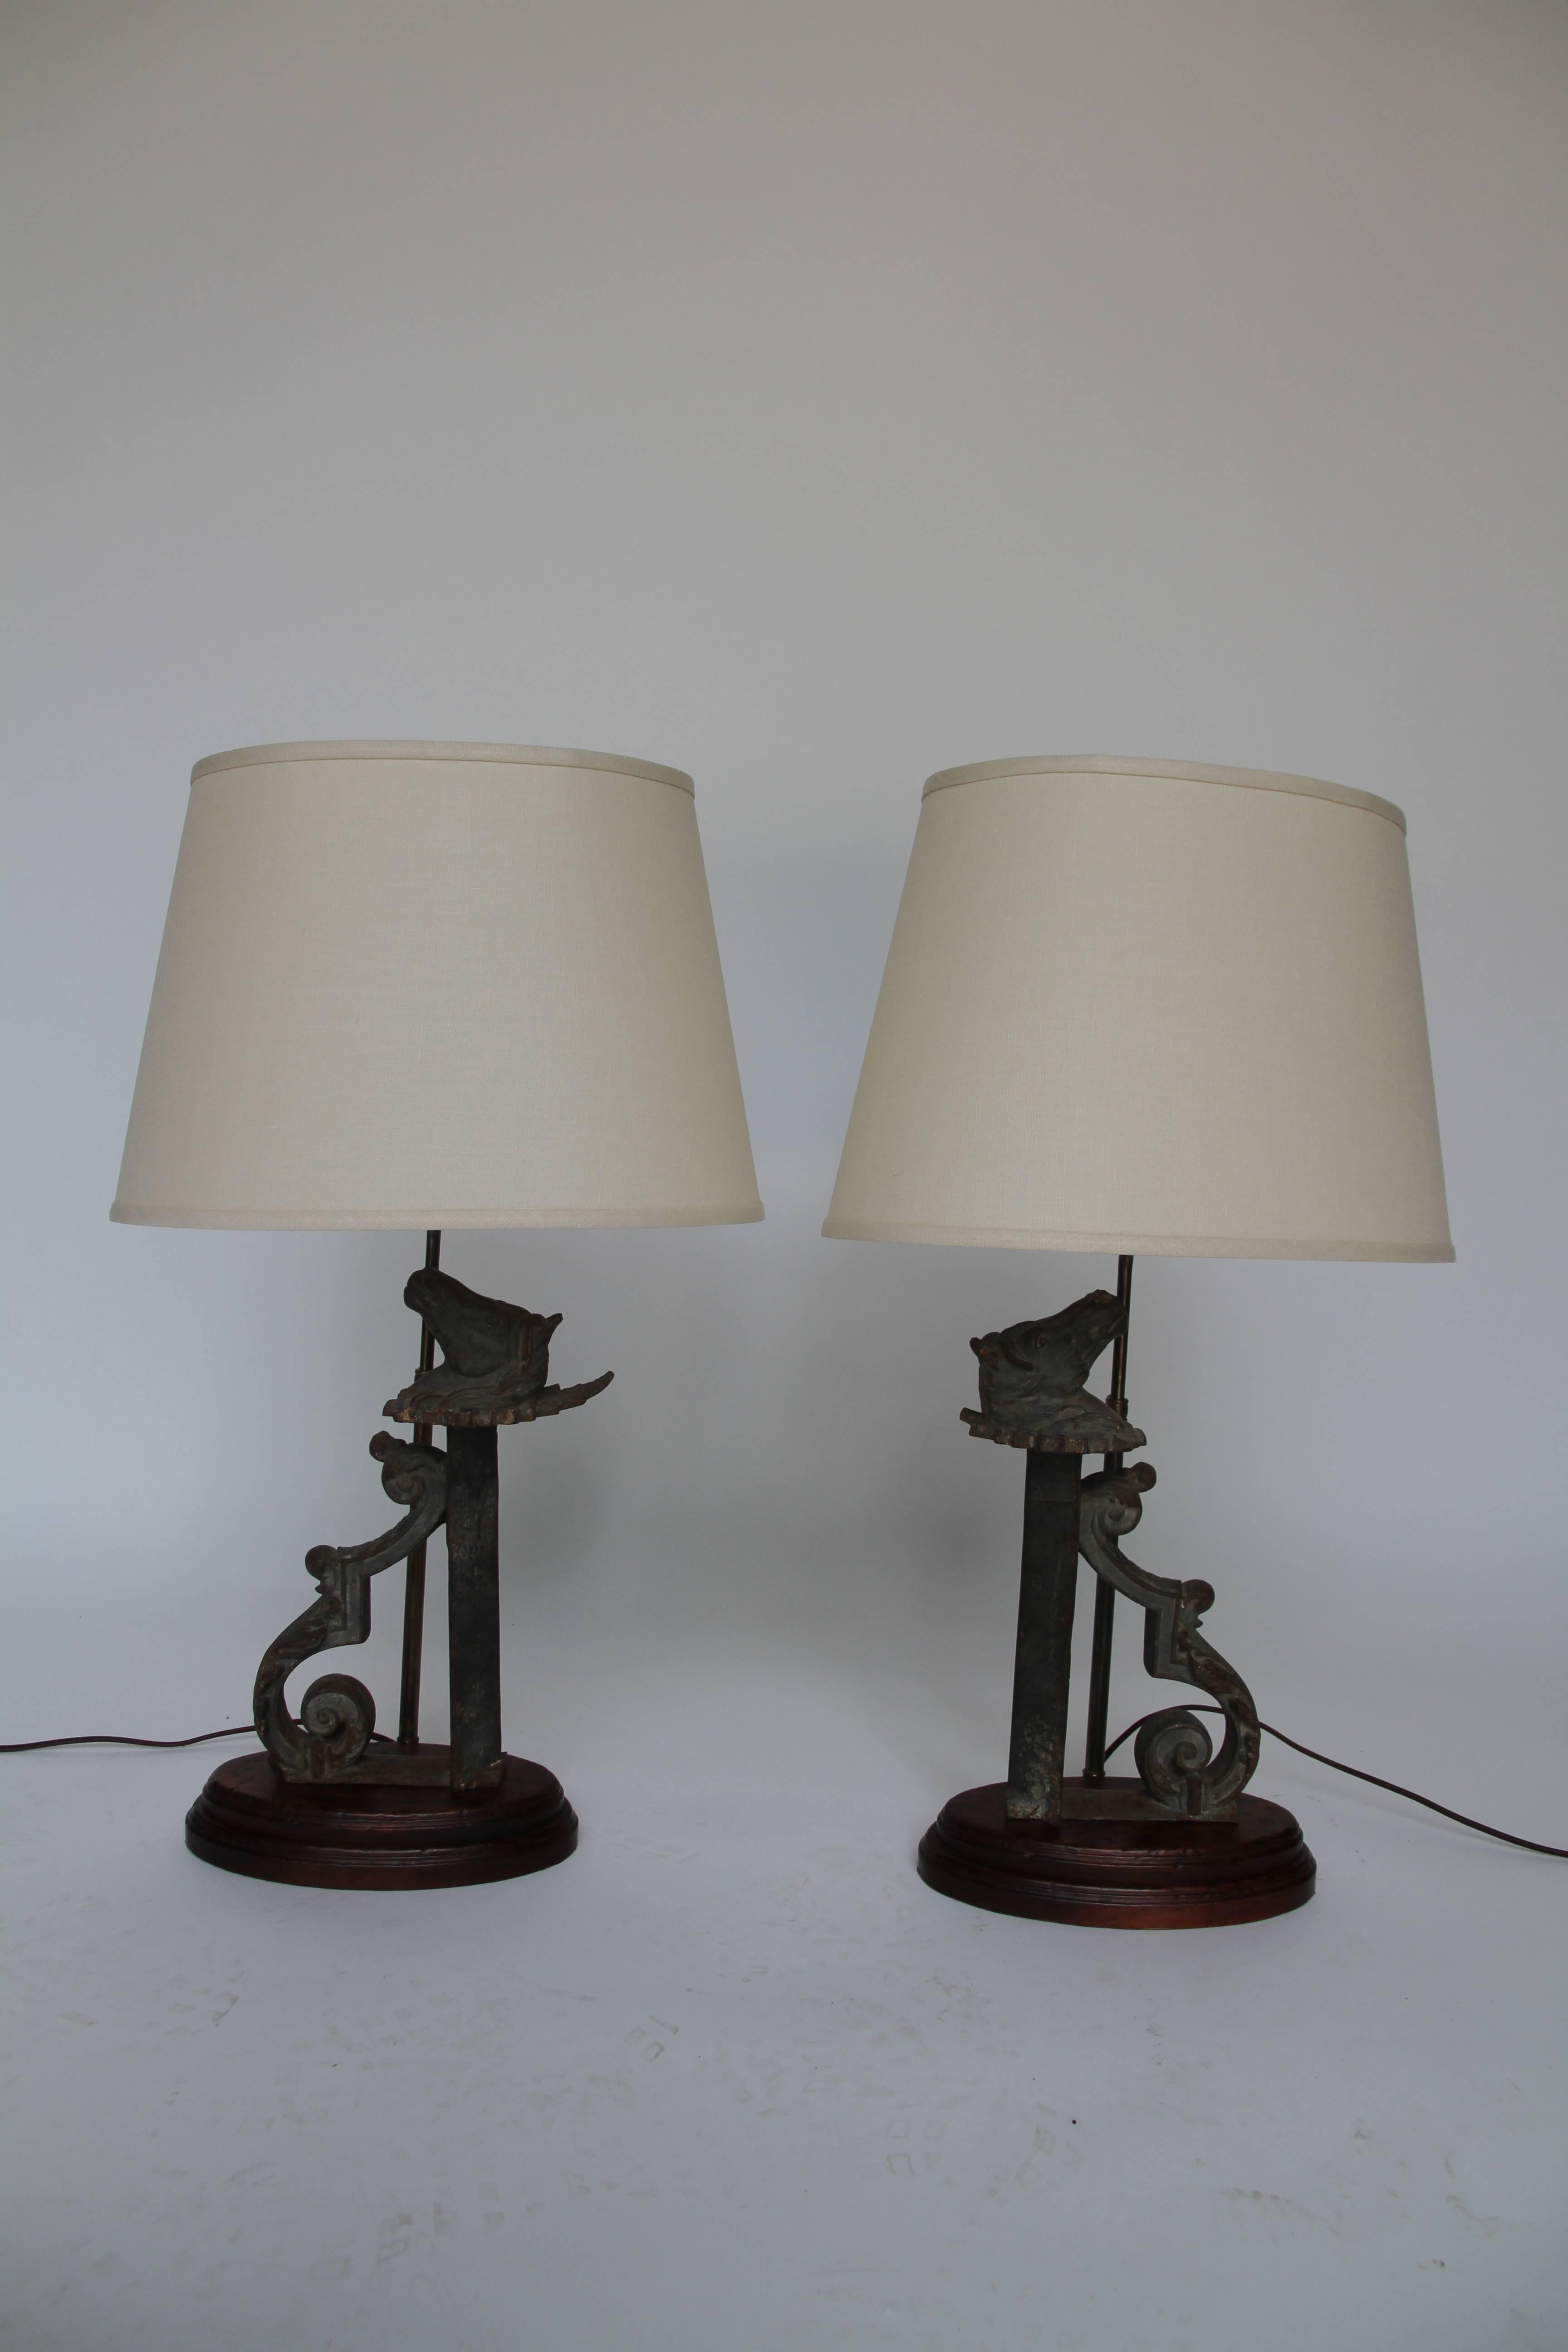 20th Century Pair of Lamps Made from Antique Iron Horse Brackets